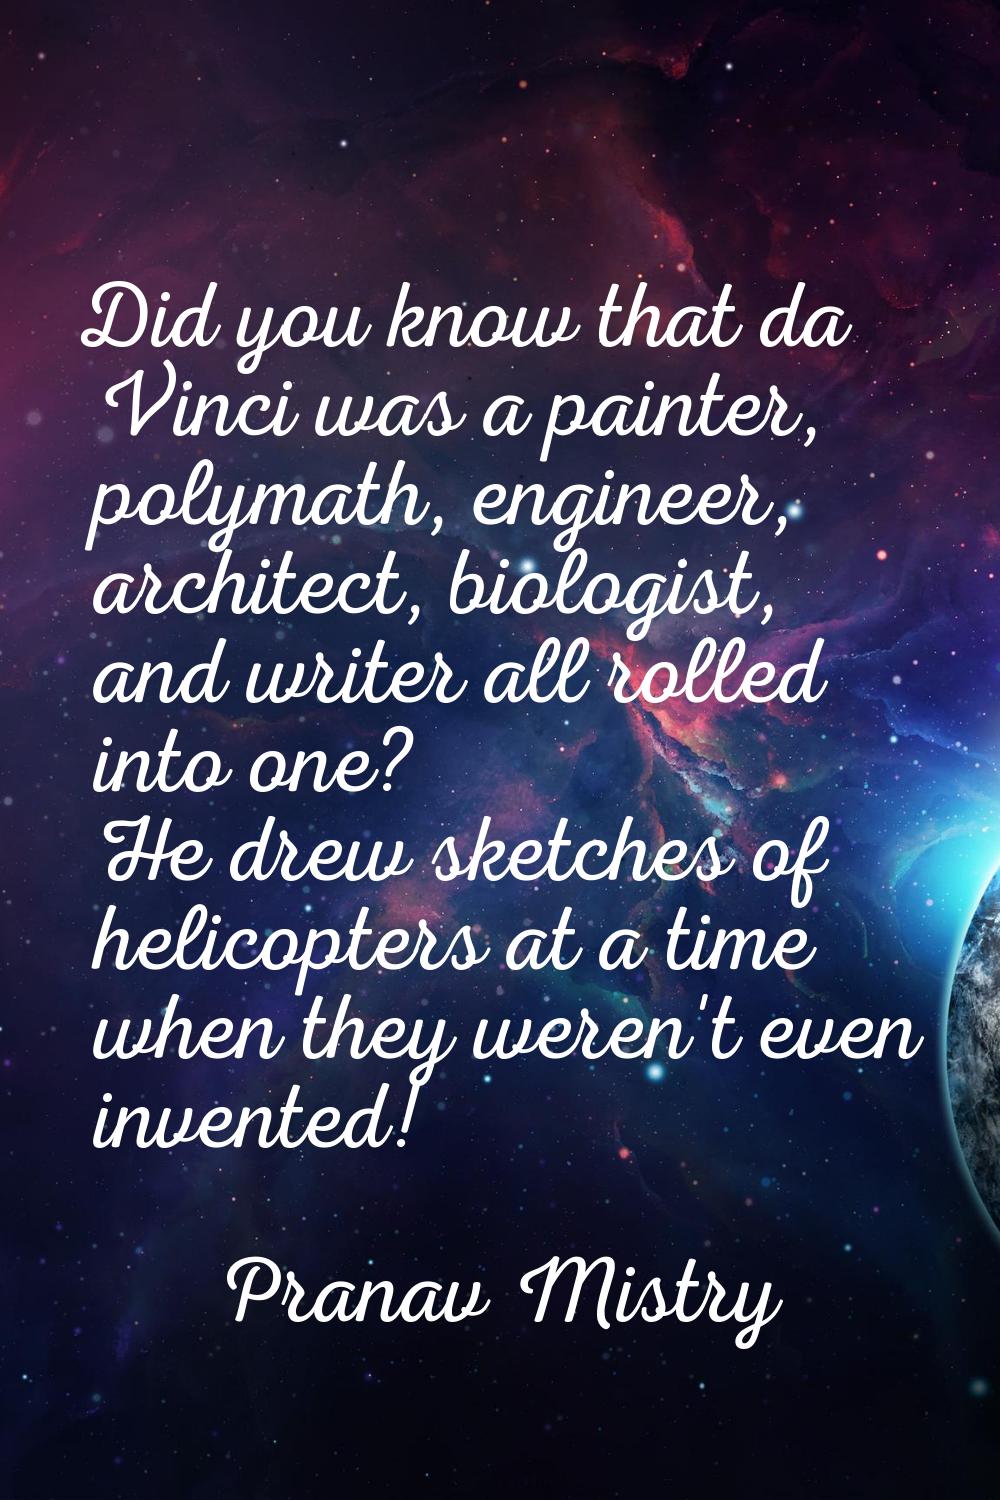 Did you know that da Vinci was a painter, polymath, engineer, architect, biologist, and writer all 